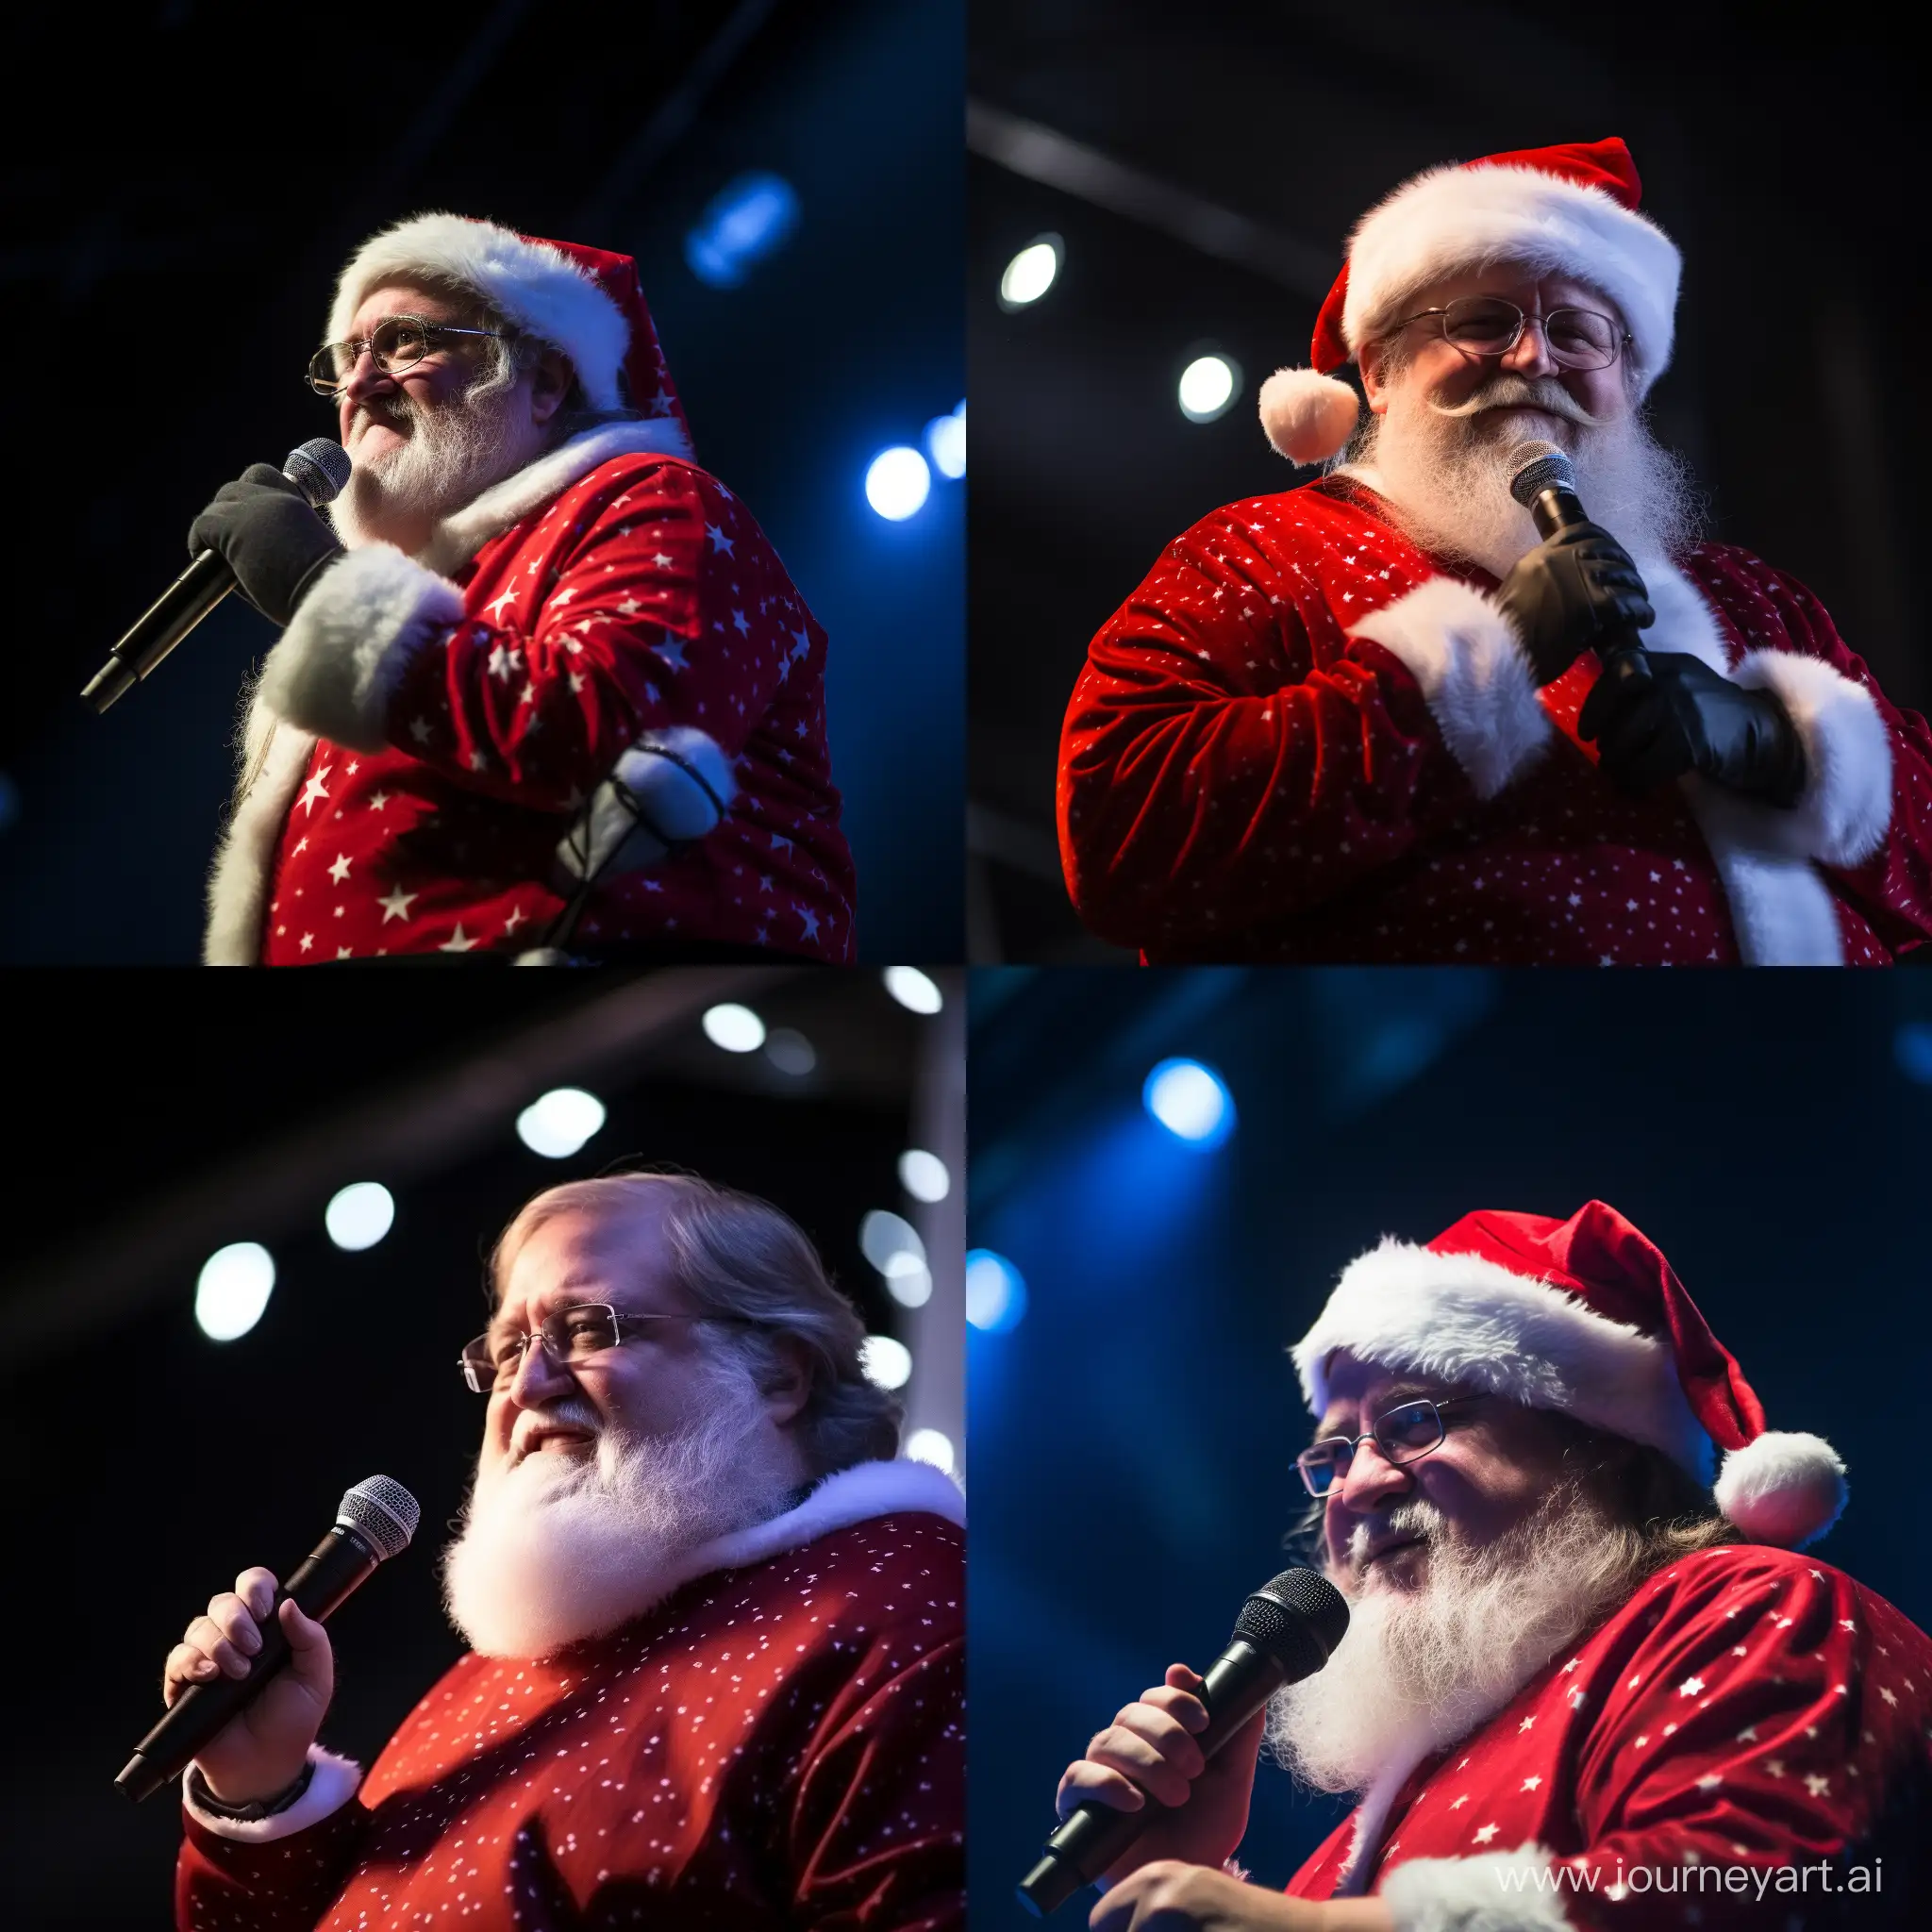 Gabe Newell stands on stage with a microphone dressed as Santa Claus